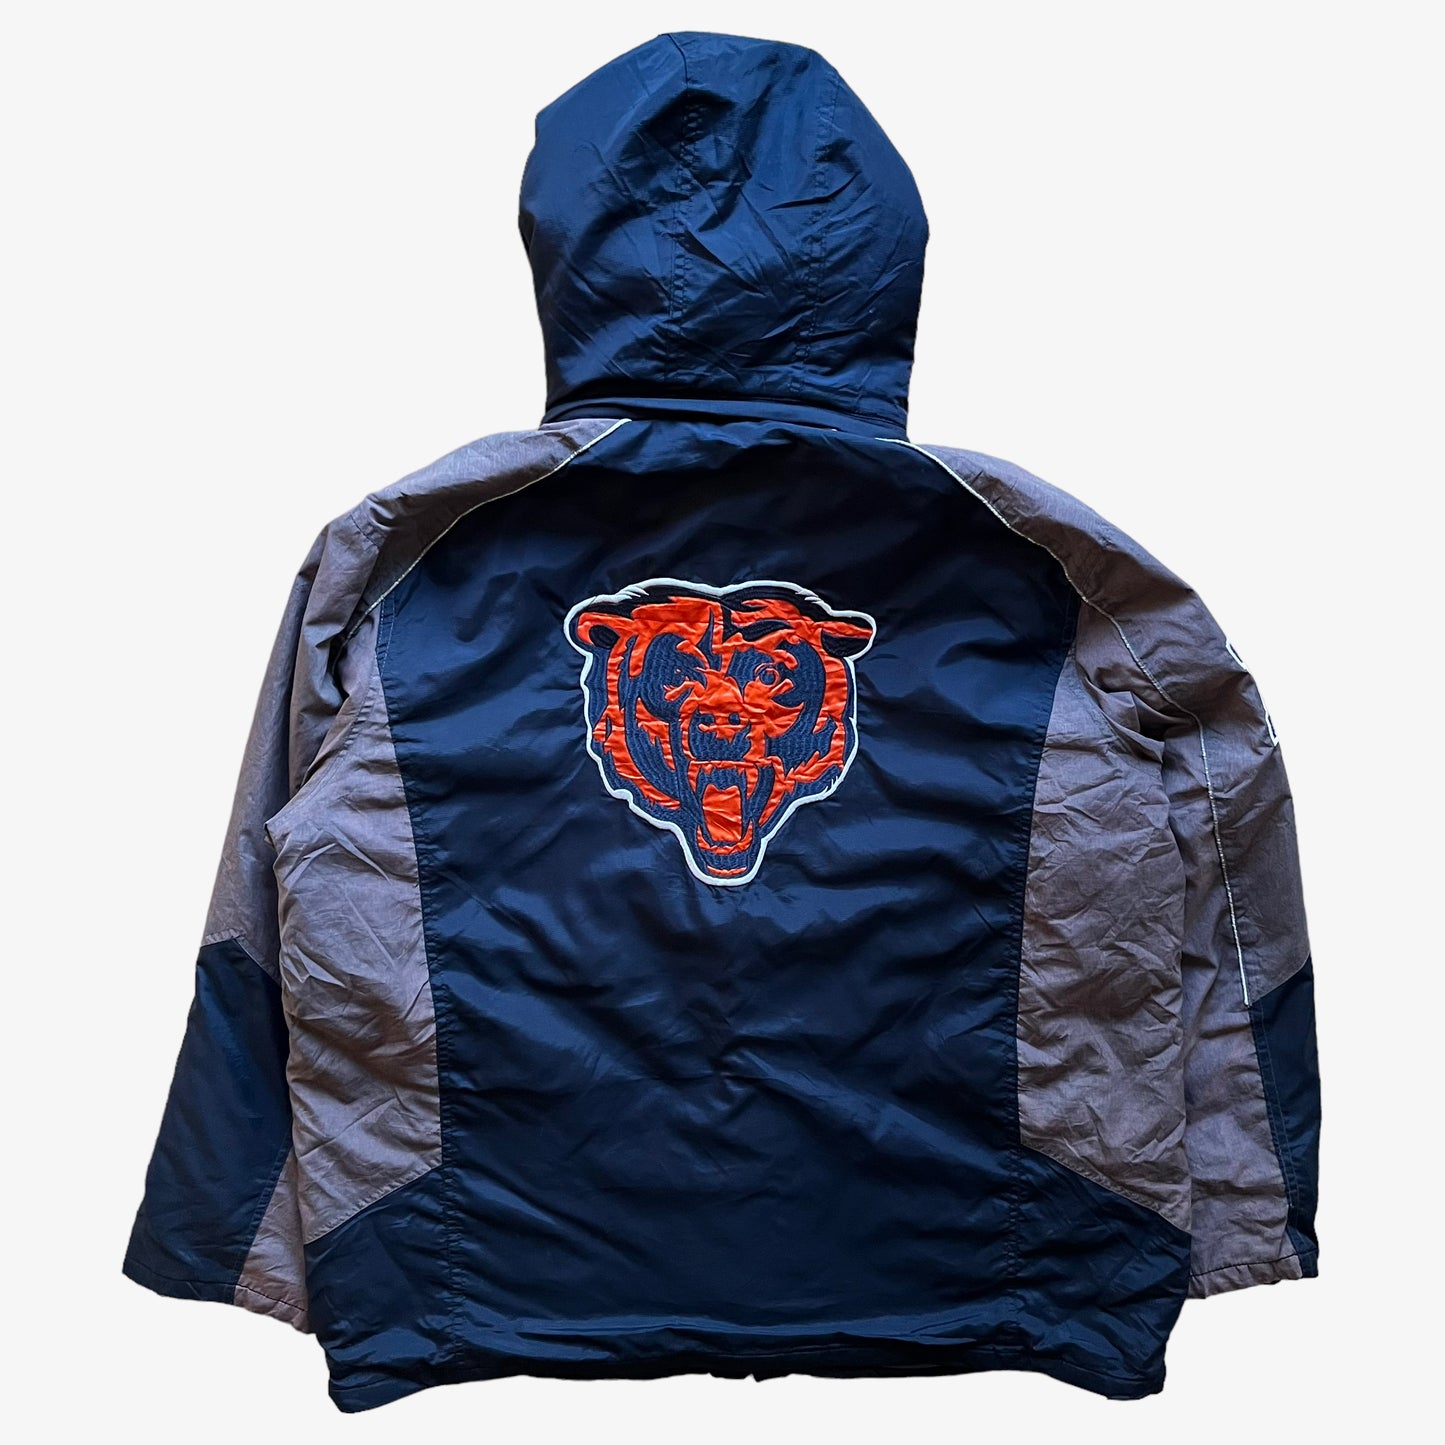 Vintage 90s Chicago Bears NFL Jacket With Back Embroidered Team Badge Back - Casspios Dream